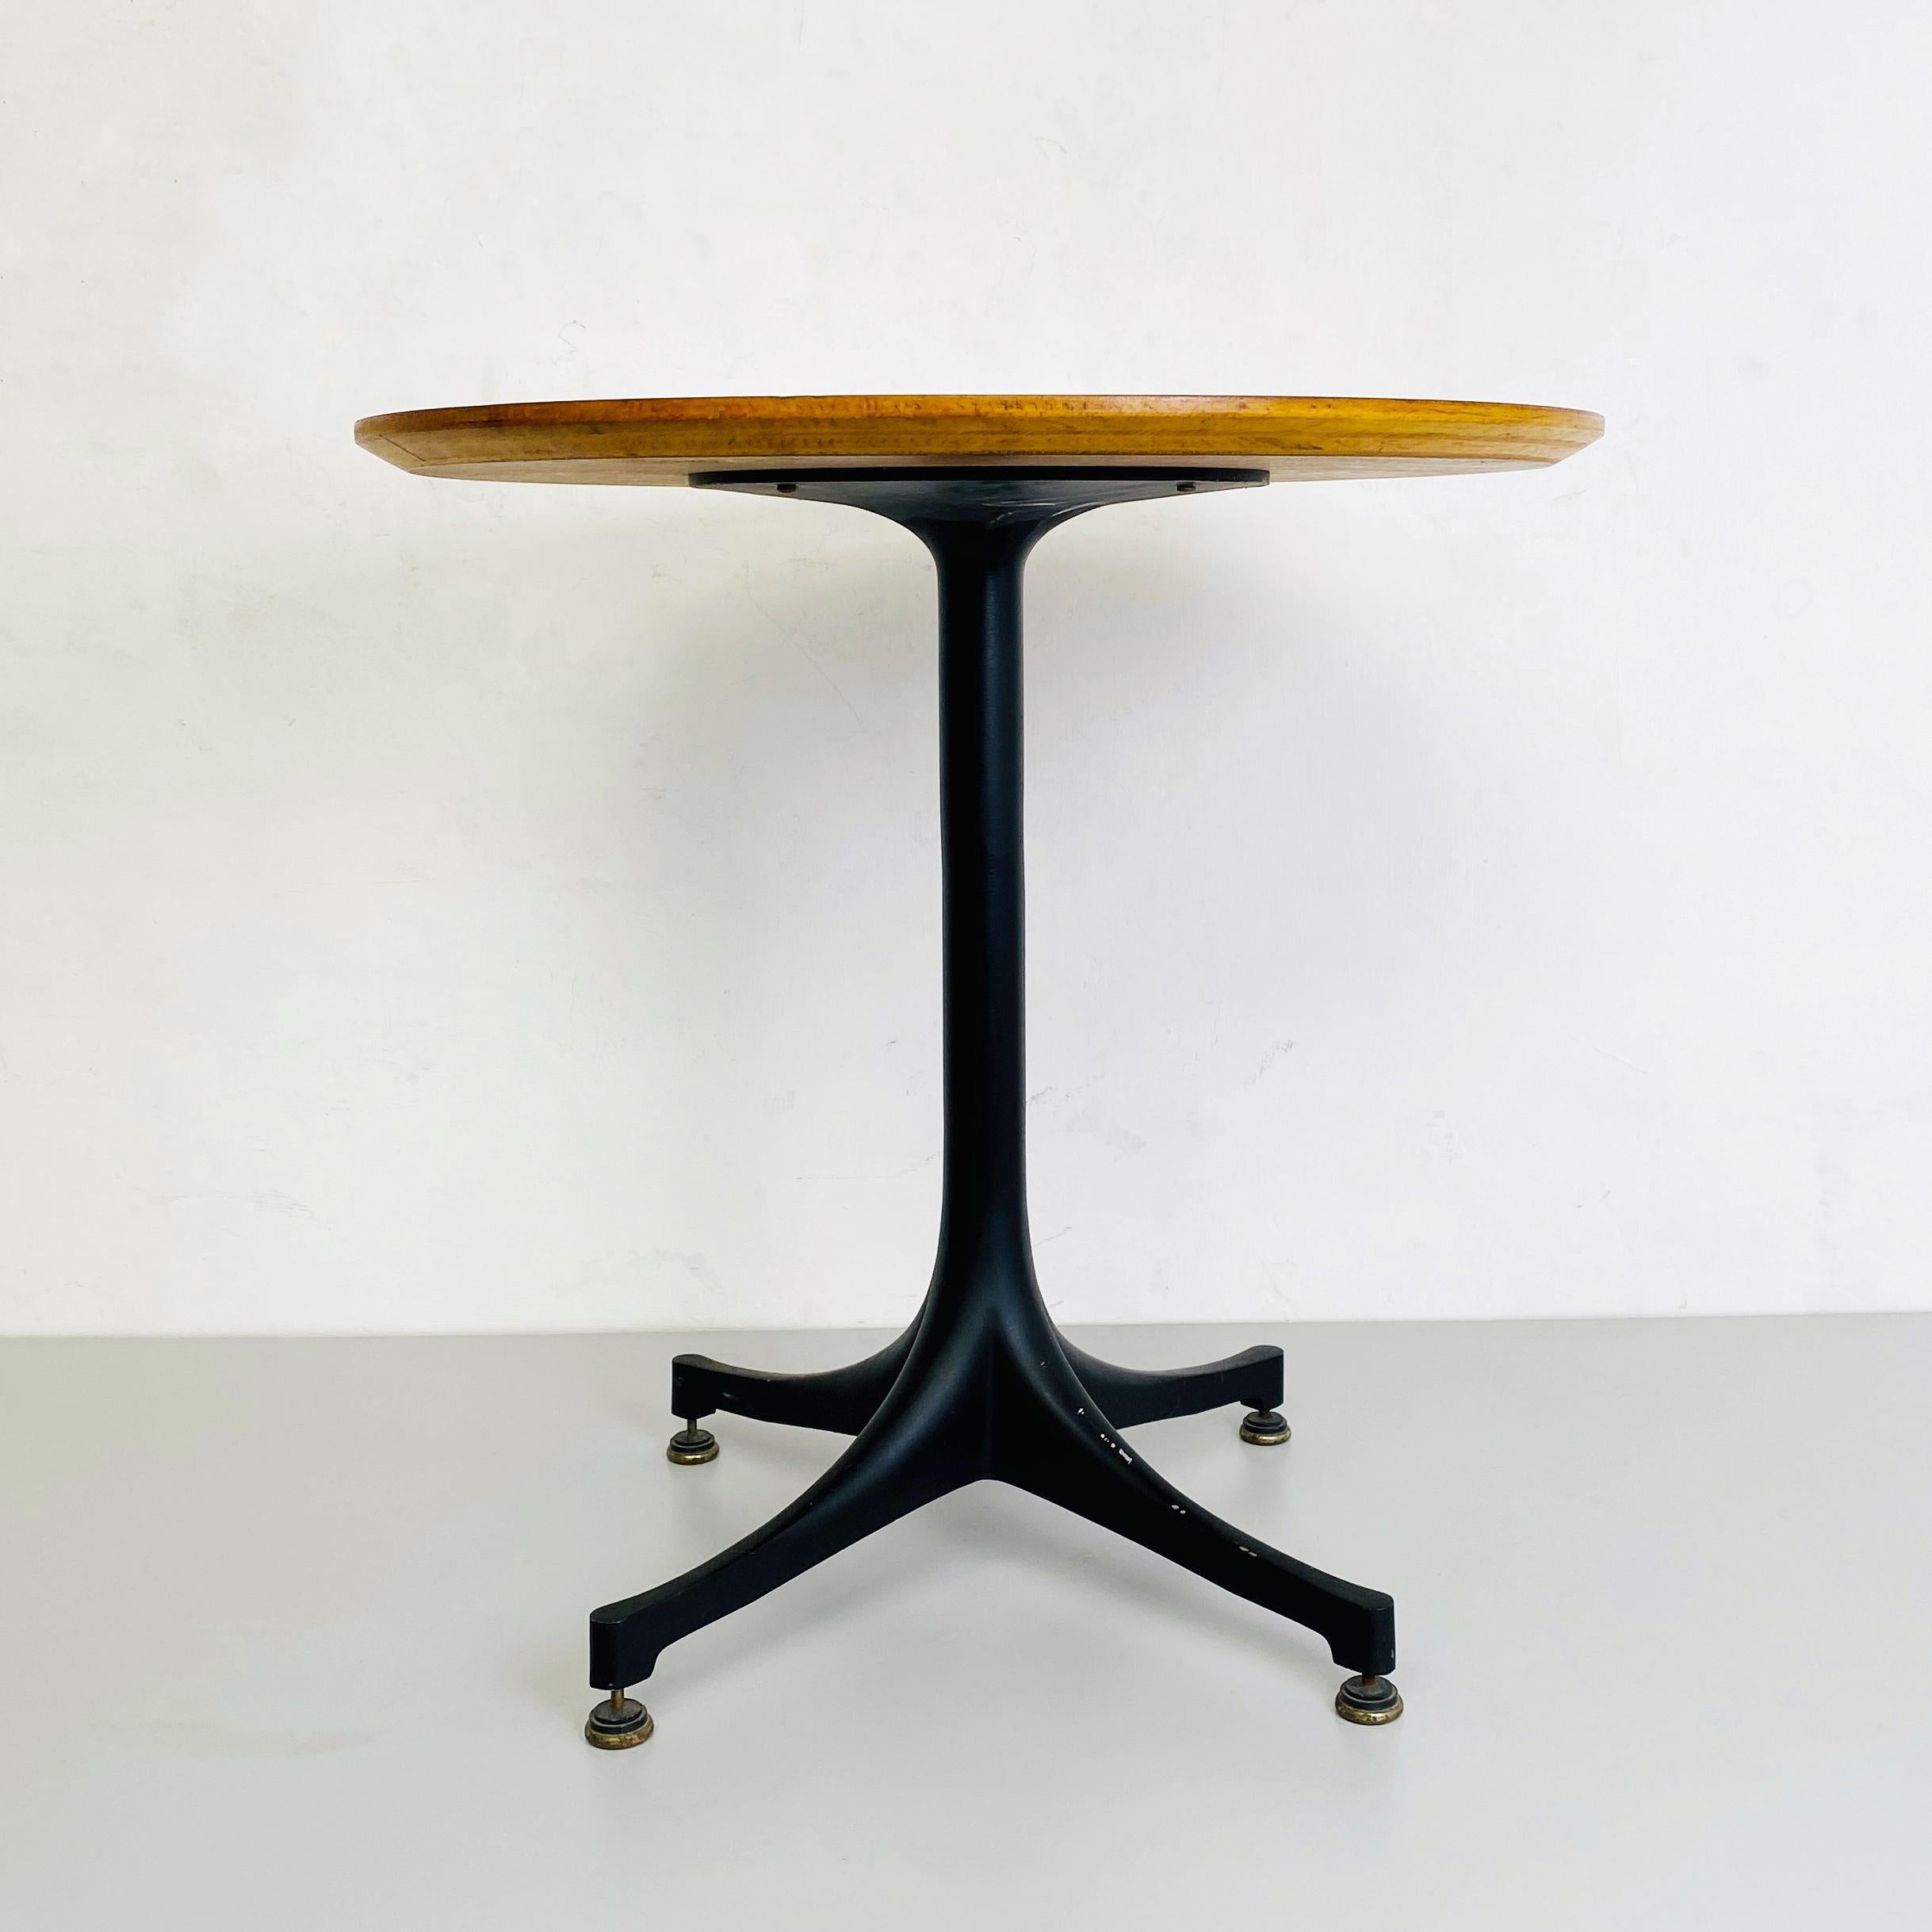 Coffee table by George Nelson for Herman Miller, 1960s
Coffee table with round wooden top and black painted metal leg. By George Nelson for Herman Miller.

Good condition, restored but shows some signs.

Measures in cm 58x57h.